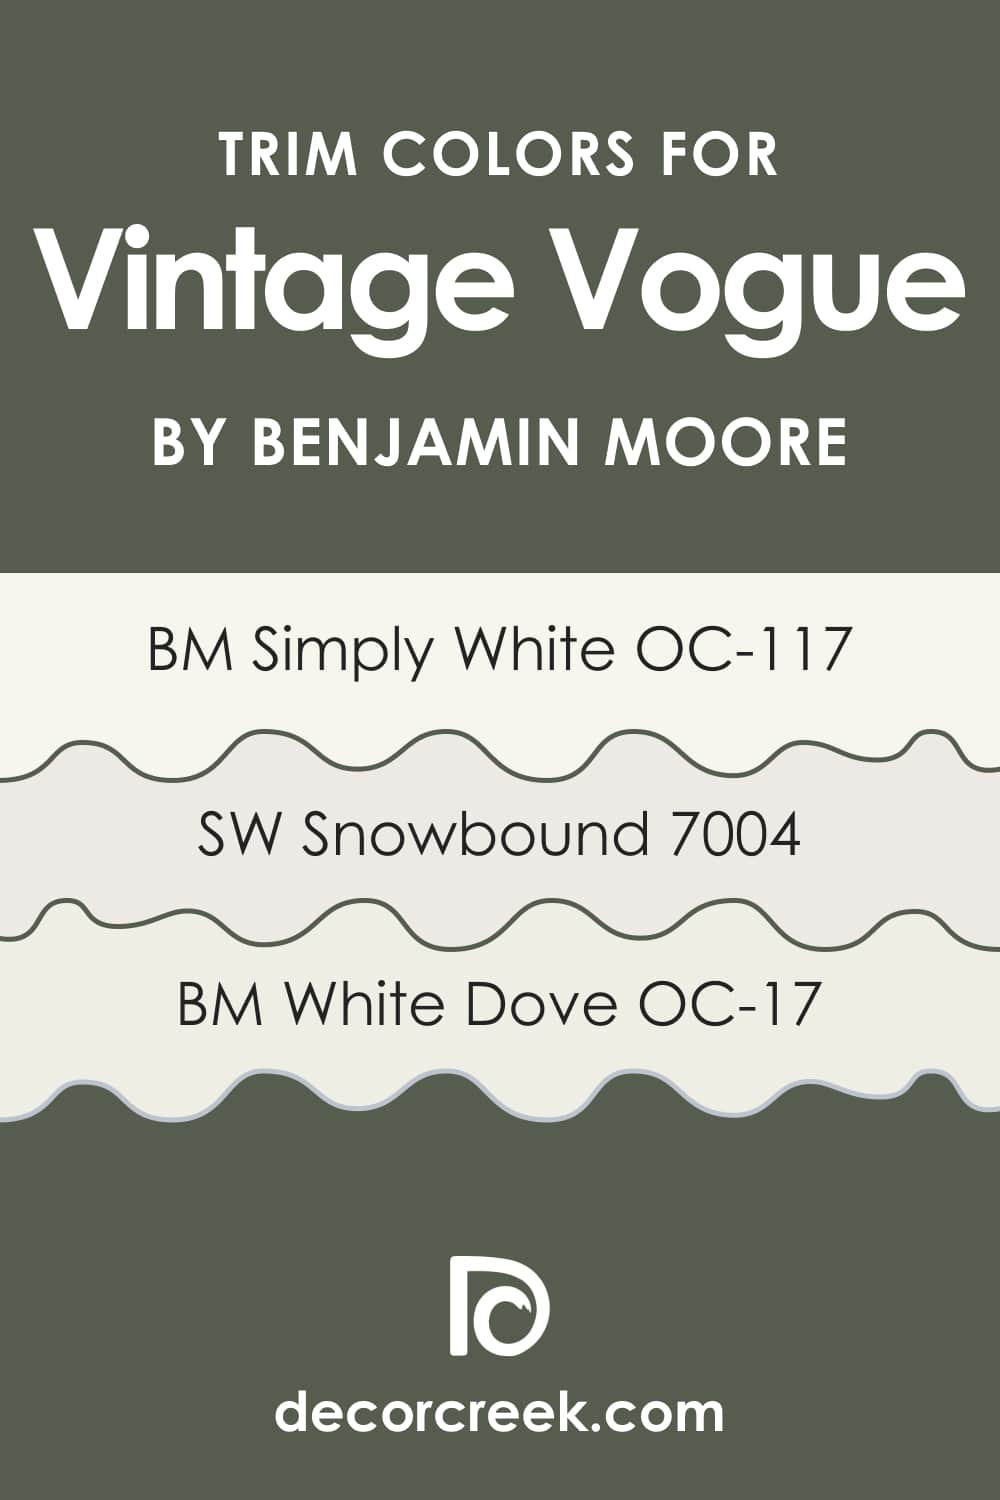 What’s the Best Trim Color to Use With BM Vintage Vogue?